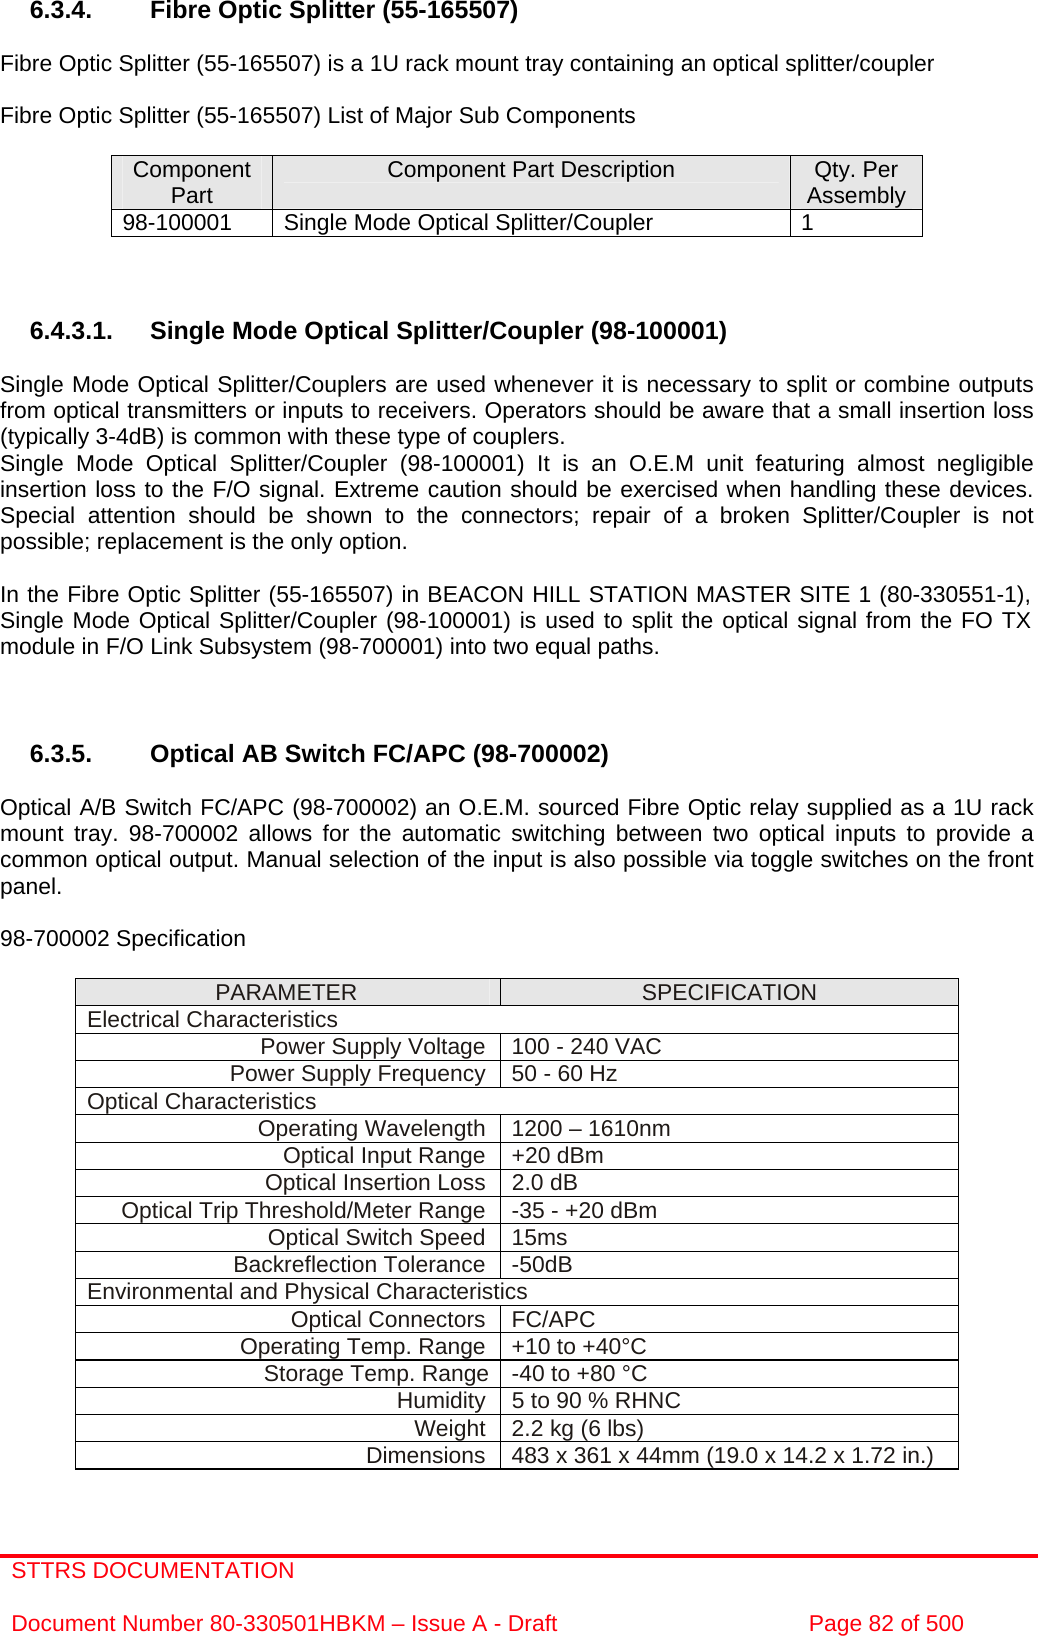 STTRS DOCUMENTATION  Document Number 80-330501HBKM – Issue A - Draft  Page 82 of 500   6.3.4.  Fibre Optic Splitter (55-165507)  Fibre Optic Splitter (55-165507) is a 1U rack mount tray containing an optical splitter/coupler  Fibre Optic Splitter (55-165507) List of Major Sub Components  Component Part  Component Part Description  Qty. Per Assembly 98-100001  Single Mode Optical Splitter/Coupler  1    6.4.3.1.  Single Mode Optical Splitter/Coupler (98-100001)  Single Mode Optical Splitter/Couplers are used whenever it is necessary to split or combine outputs from optical transmitters or inputs to receivers. Operators should be aware that a small insertion loss (typically 3-4dB) is common with these type of couplers.  Single Mode Optical Splitter/Coupler (98-100001) It is an O.E.M unit featuring almost negligible insertion loss to the F/O signal. Extreme caution should be exercised when handling these devices. Special attention should be shown to the connectors; repair of a broken Splitter/Coupler is not possible; replacement is the only option.  In the Fibre Optic Splitter (55-165507) in BEACON HILL STATION MASTER SITE 1 (80-330551-1), Single Mode Optical Splitter/Coupler (98-100001) is used to split the optical signal from the FO TX module in F/O Link Subsystem (98-700001) into two equal paths.    6.3.5.  Optical AB Switch FC/APC (98-700002)   Optical A/B Switch FC/APC (98-700002) an O.E.M. sourced Fibre Optic relay supplied as a 1U rack mount tray. 98-700002 allows for the automatic switching between two optical inputs to provide a common optical output. Manual selection of the input is also possible via toggle switches on the front panel.  98-700002 Specification   PARAMETER  SPECIFICATION Electrical Characteristics Power Supply Voltage  100 - 240 VAC Power Supply Frequency 50 - 60 Hz Optical Characteristics Operating Wavelength  1200 – 1610nm Optical Input Range  +20 dBm Optical Insertion Loss  2.0 dB Optical Trip Threshold/Meter Range  -35 - +20 dBm Optical Switch Speed  15ms Backreflection Tolerance  -50dB Environmental and Physical Characteristics Optical Connectors  FC/APC Operating Temp. Range  +10 to +40°C Storage Temp. Range  -40 to +80 °C   Humidity  5 to 90 % RHNC Weight  2.2 kg (6 lbs) Dimensions  483 x 361 x 44mm (19.0 x 14.2 x 1.72 in.)  